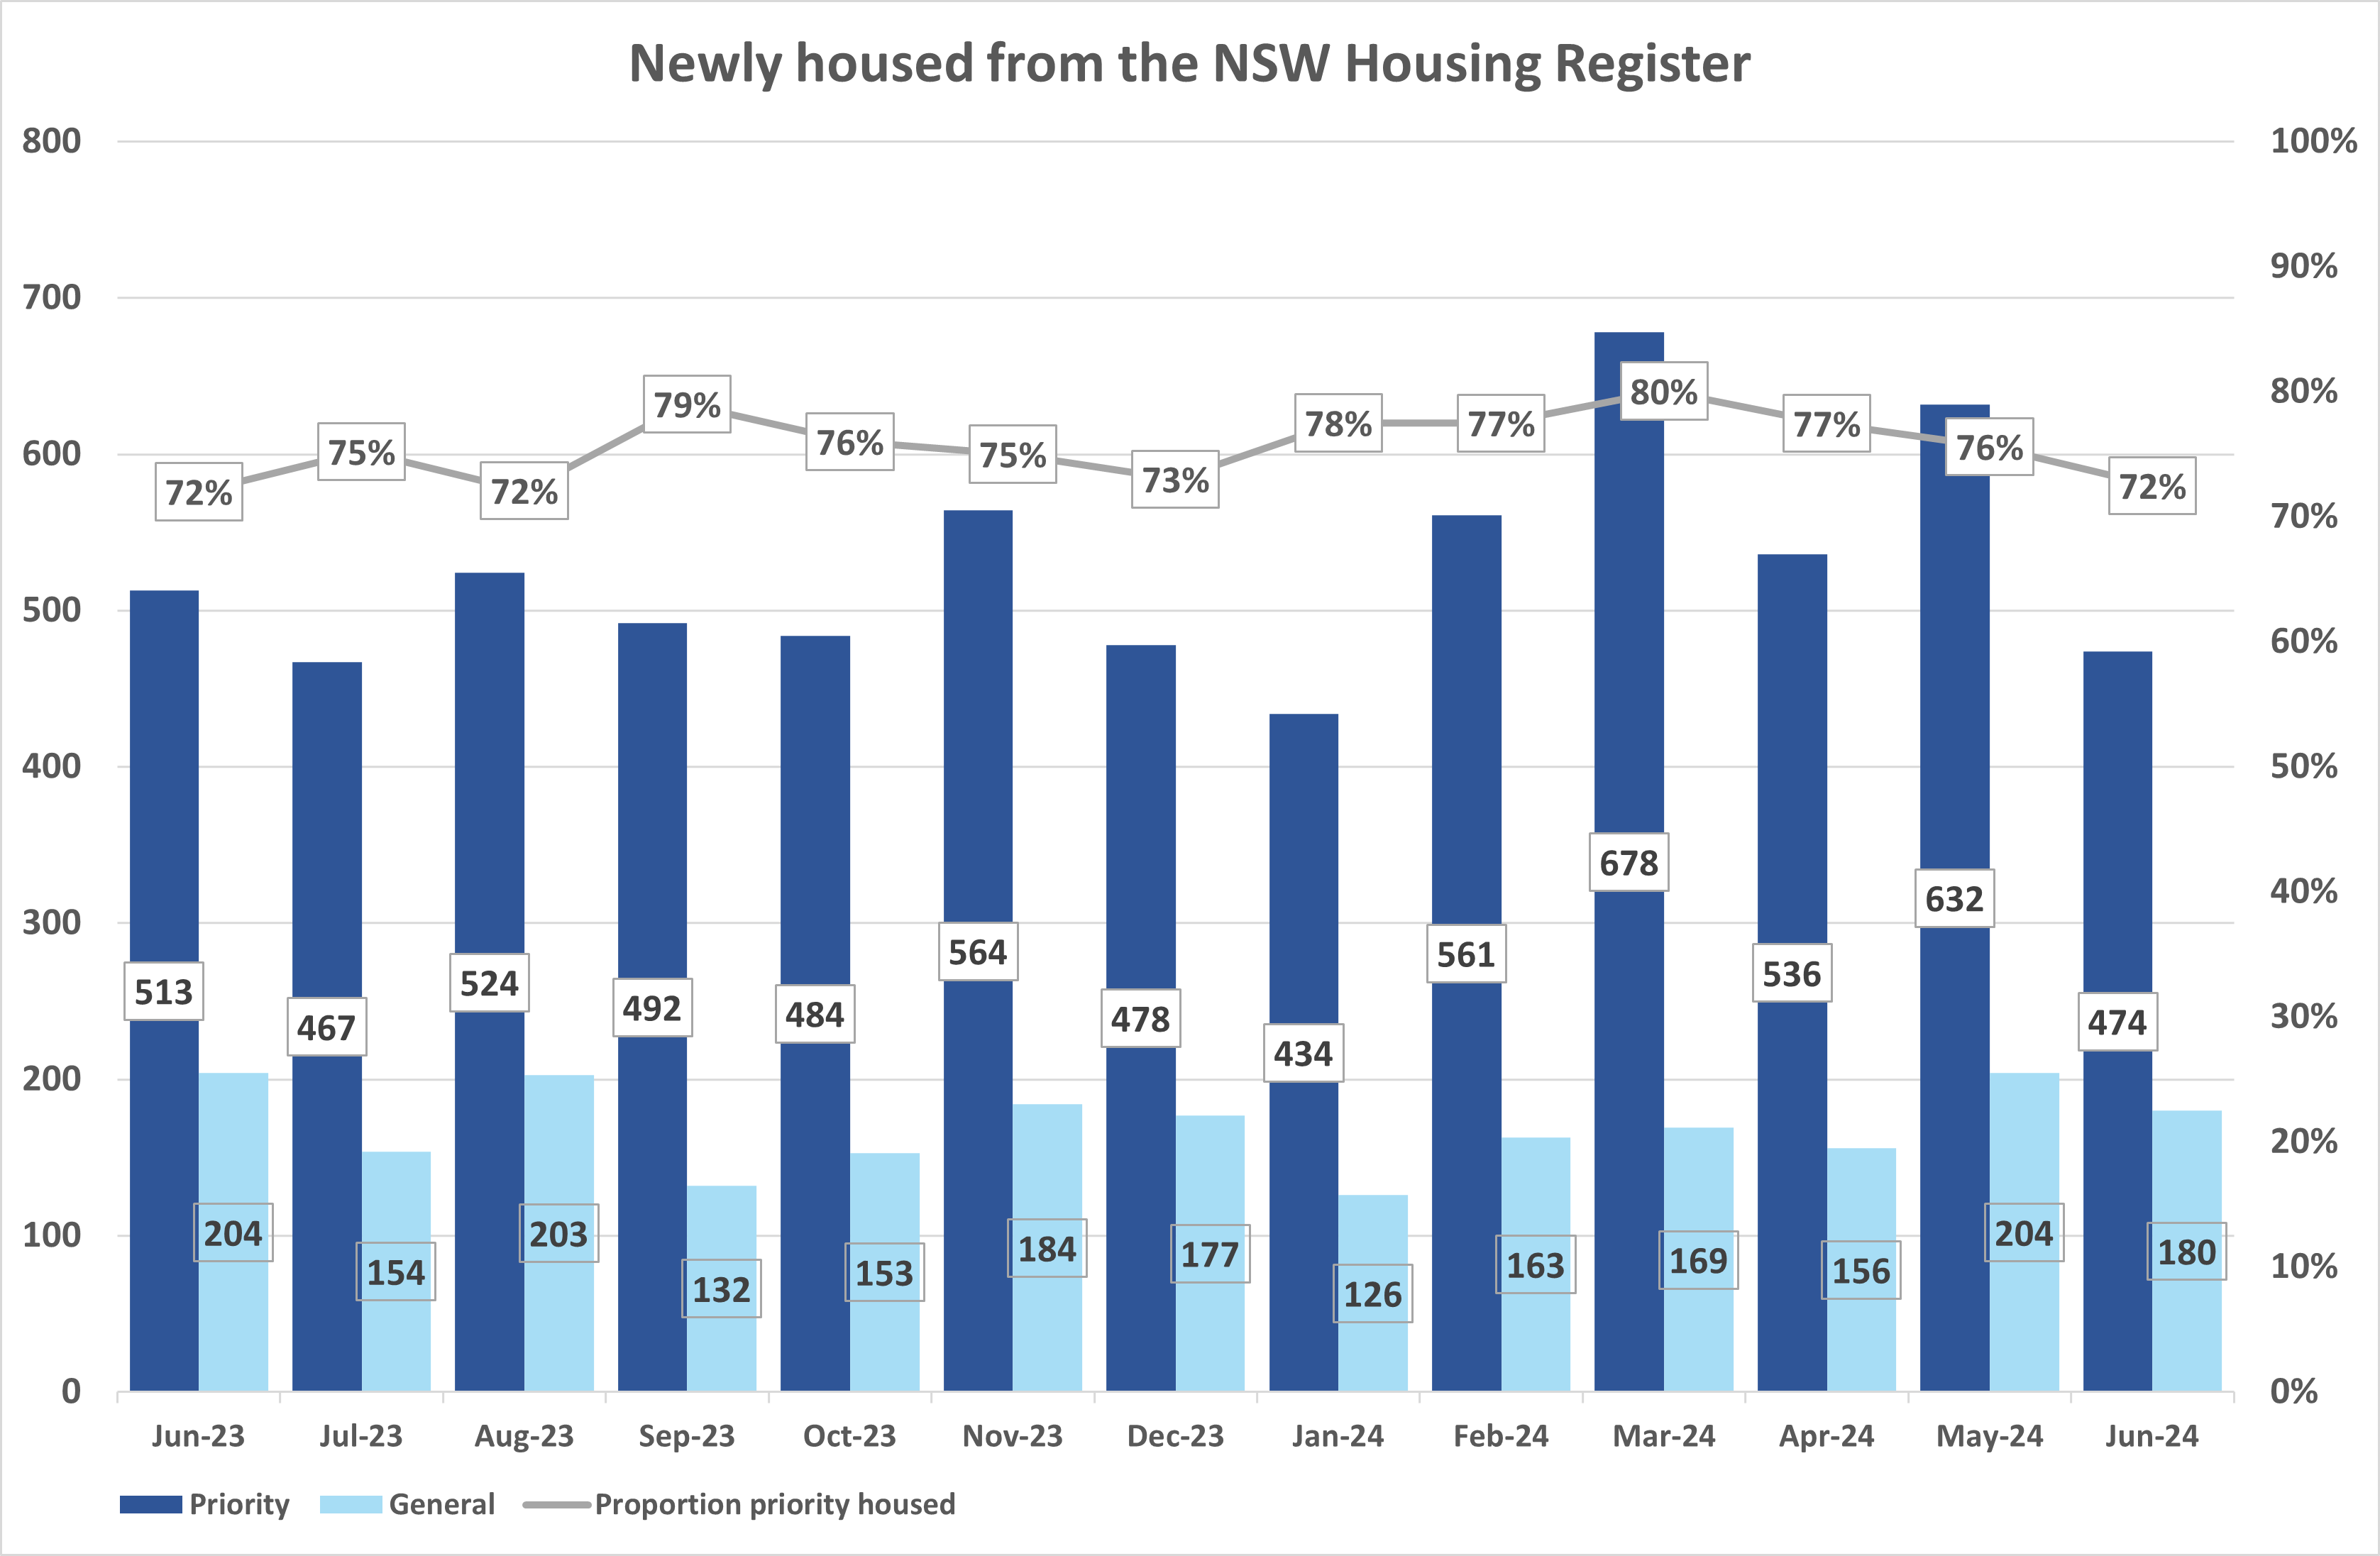 Bar graph showing the number of priority and general applicant household housed from the NSW Housing Register and percentage of priority housed